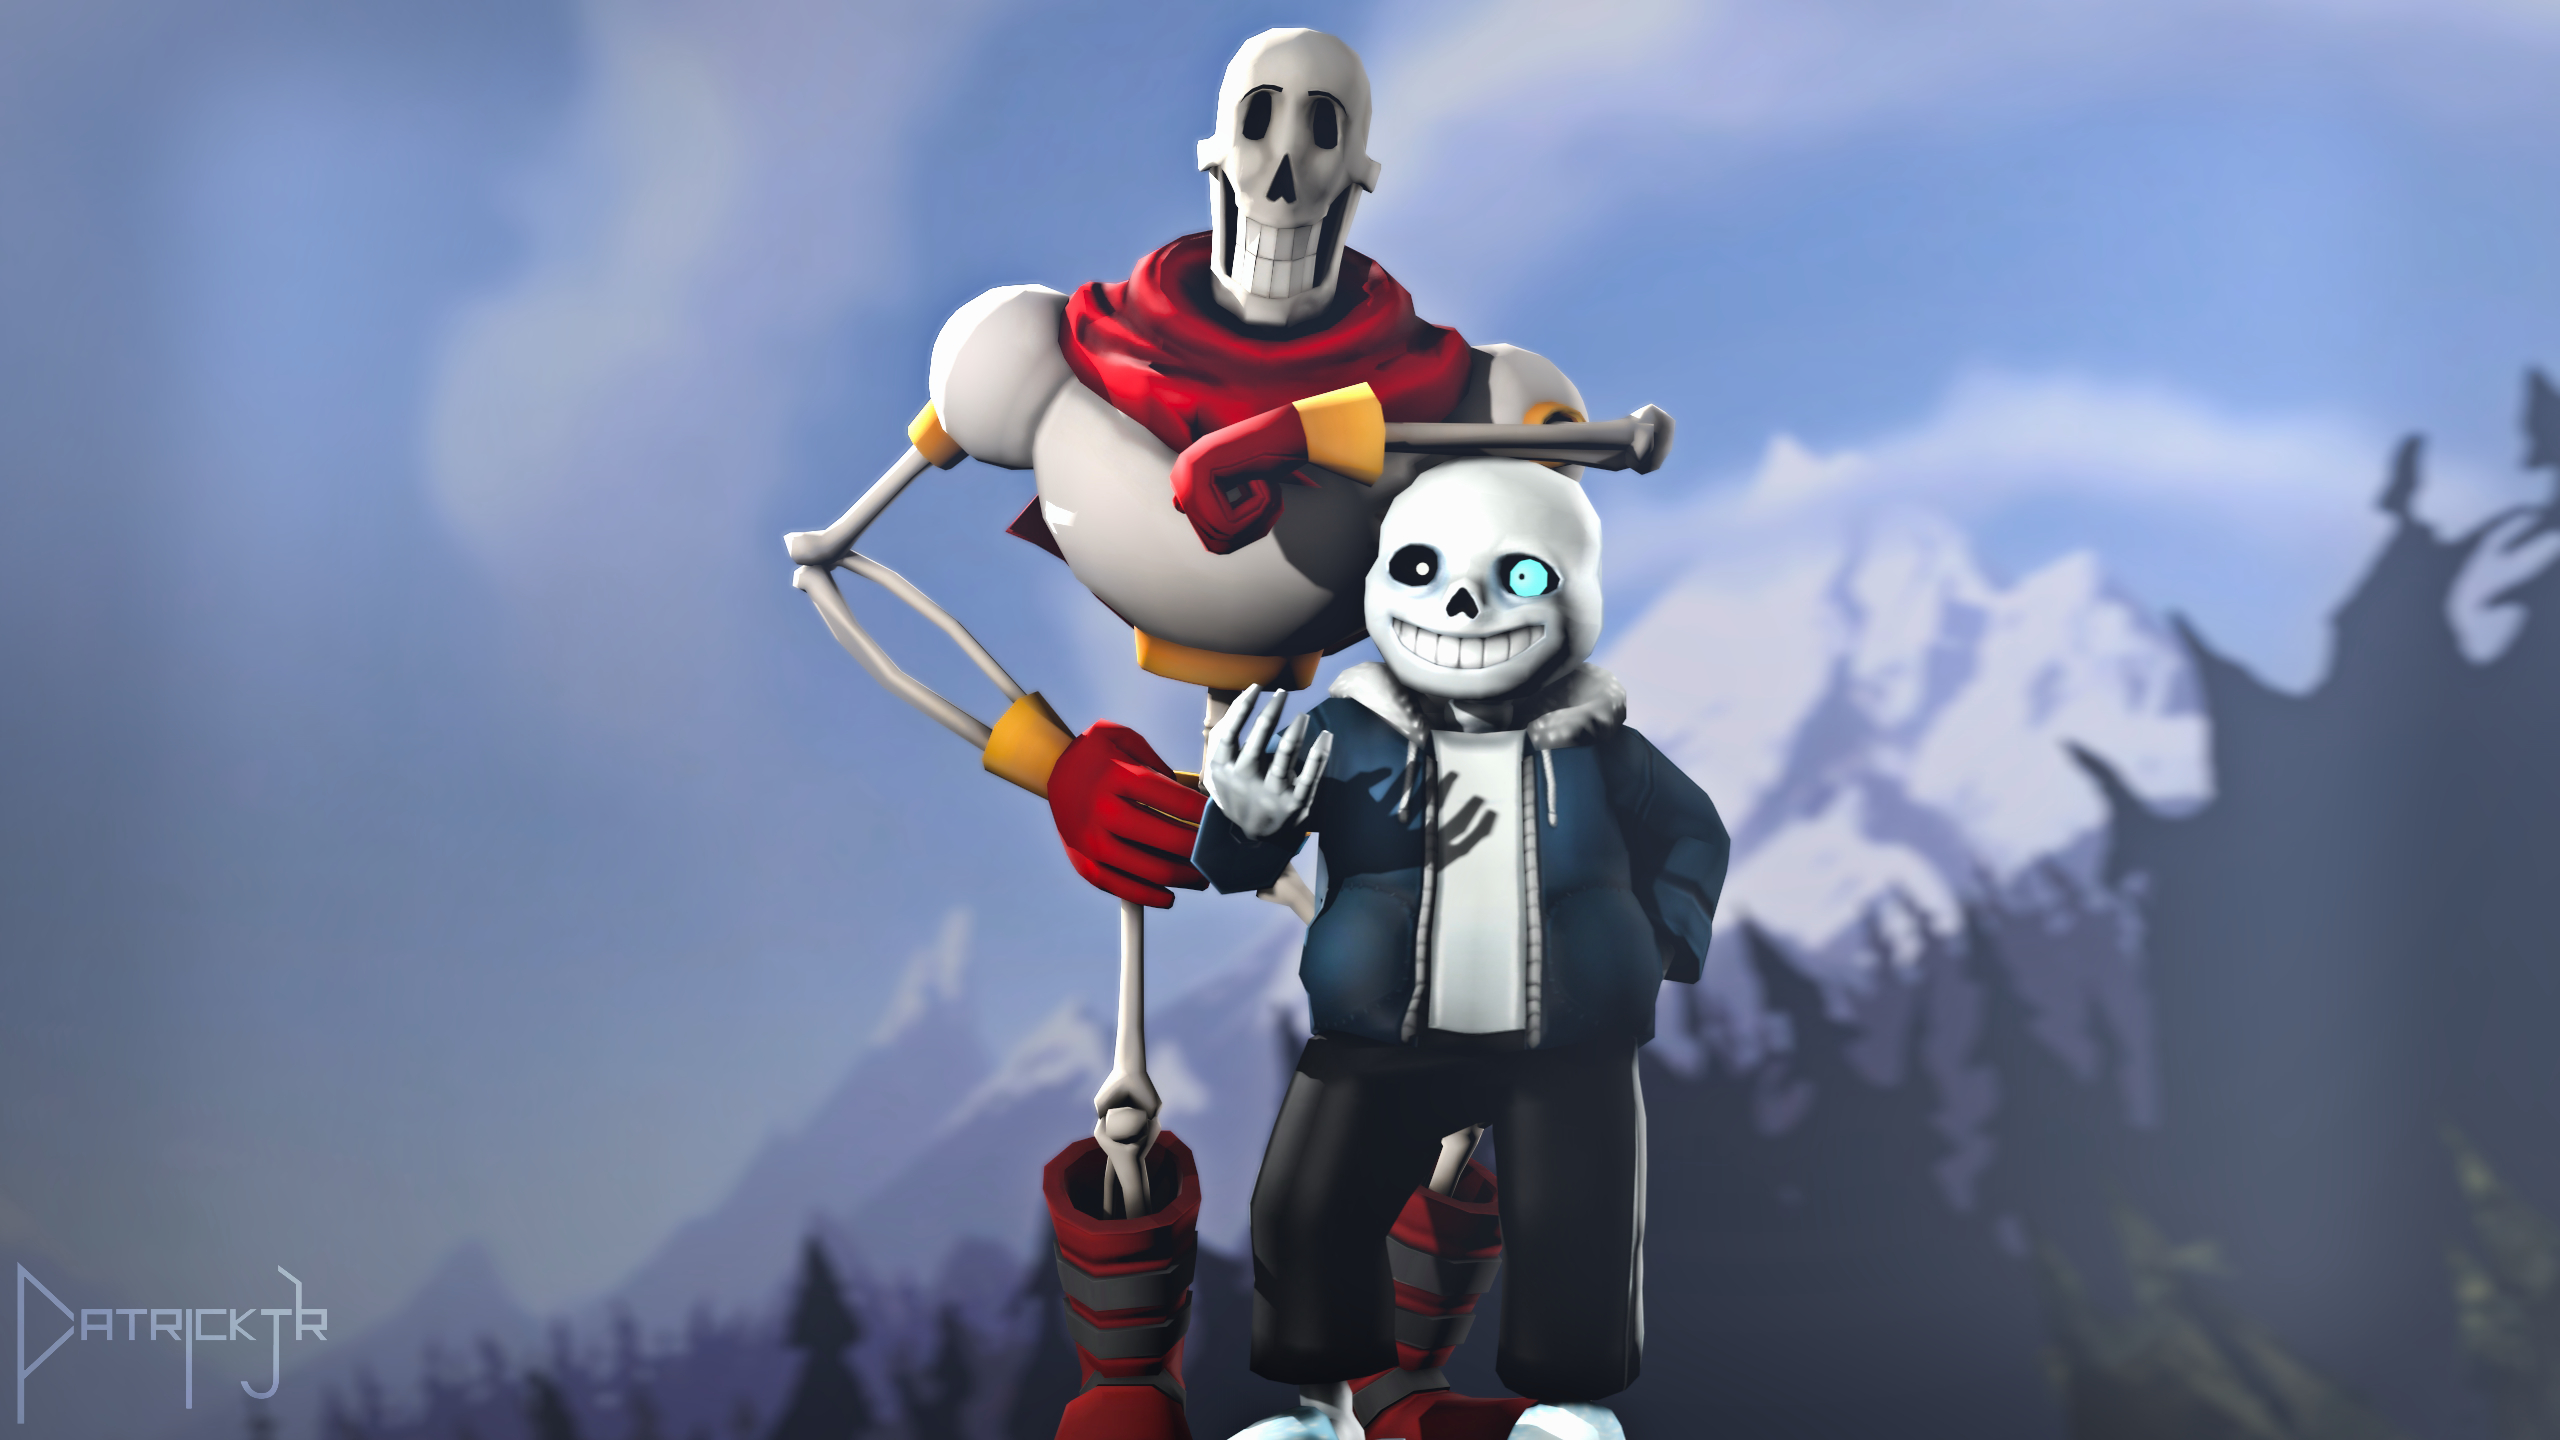 2560x1440 40+ Papyrus (Undertale) HD Wallpapers and Backgrounds